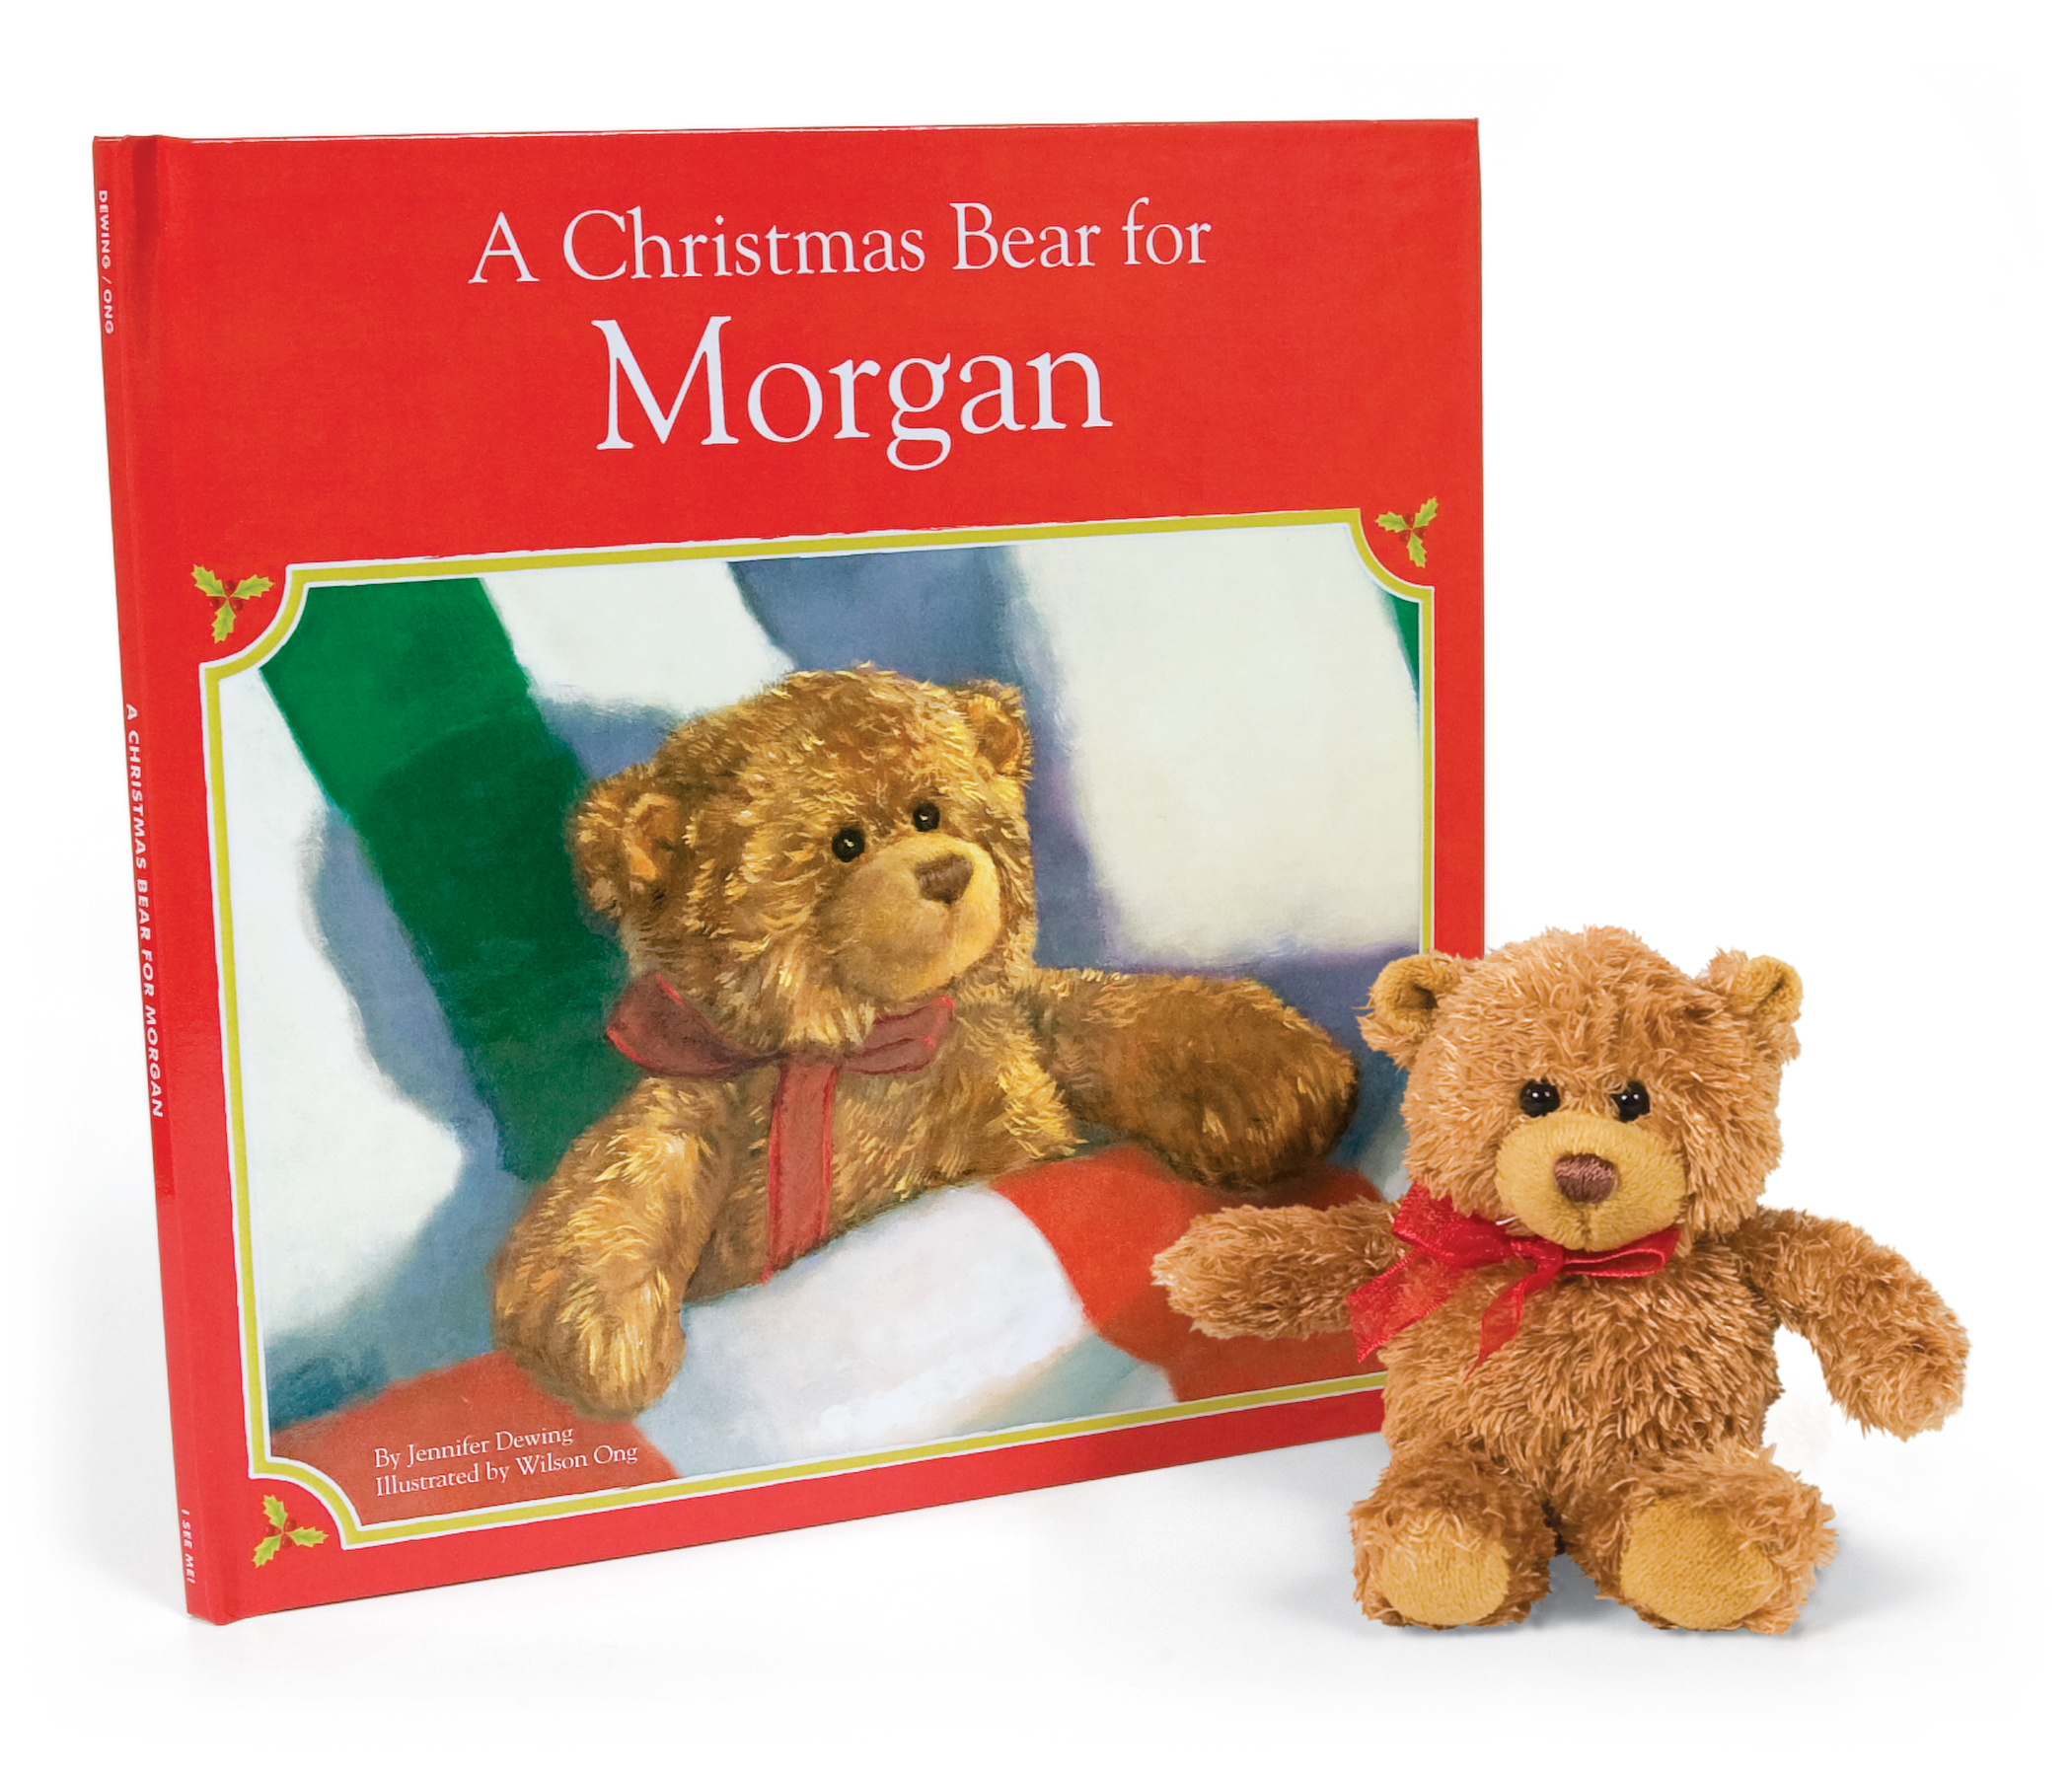 Looking for a personalized book for kids? Want a cute Christmas book for kids that will become a treasured keepsake? A Christmas Bear for me is perfect.